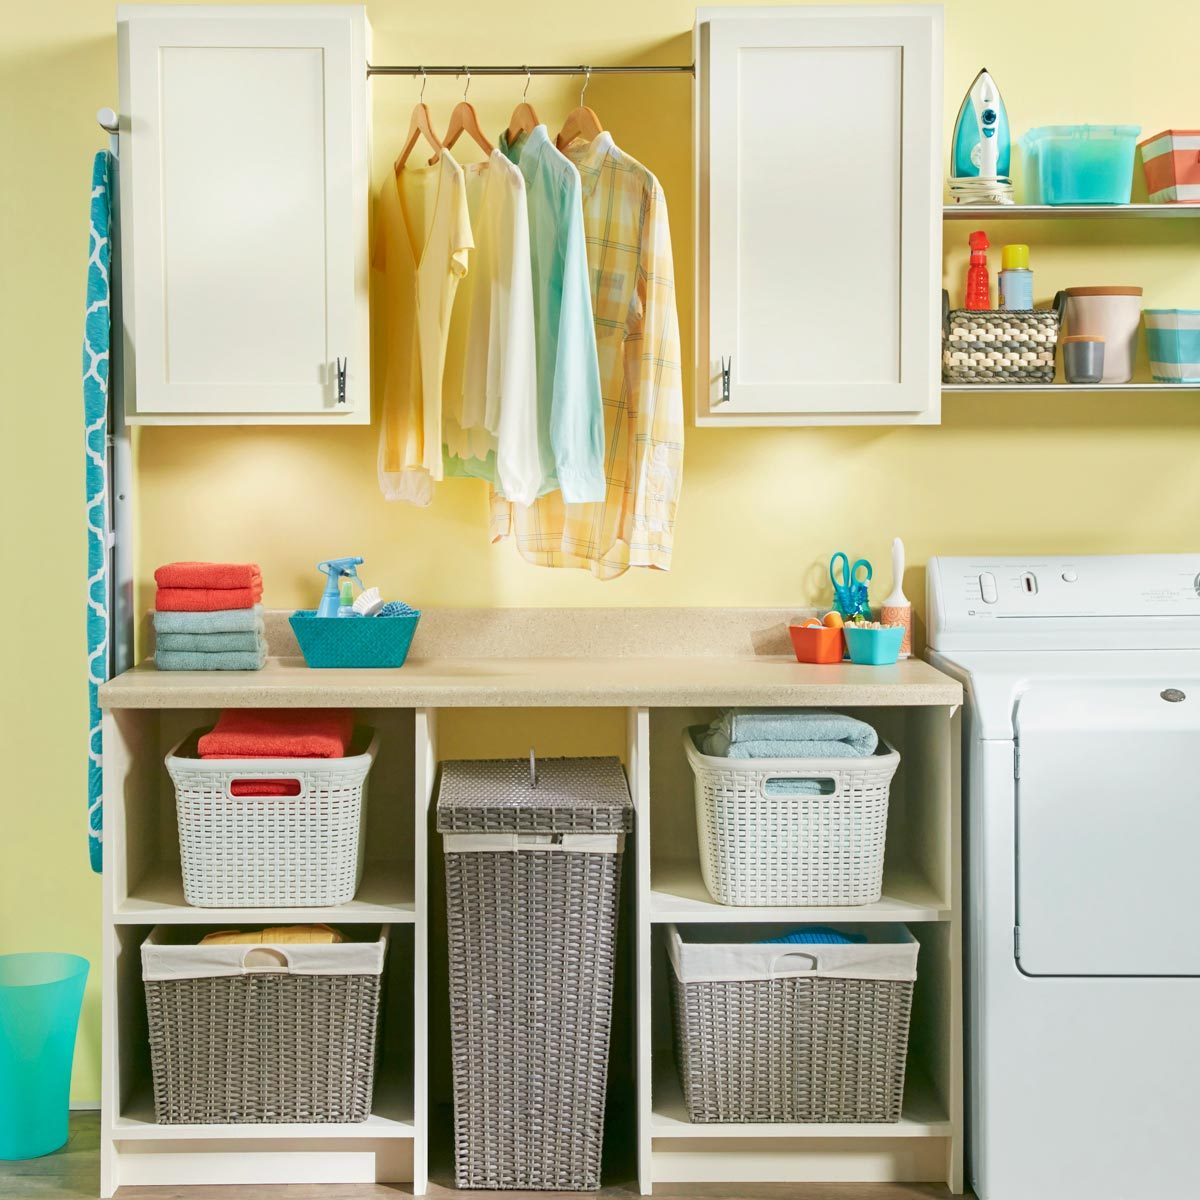 24 Laundry Room Storage Solutions to Freshen Up Your Space